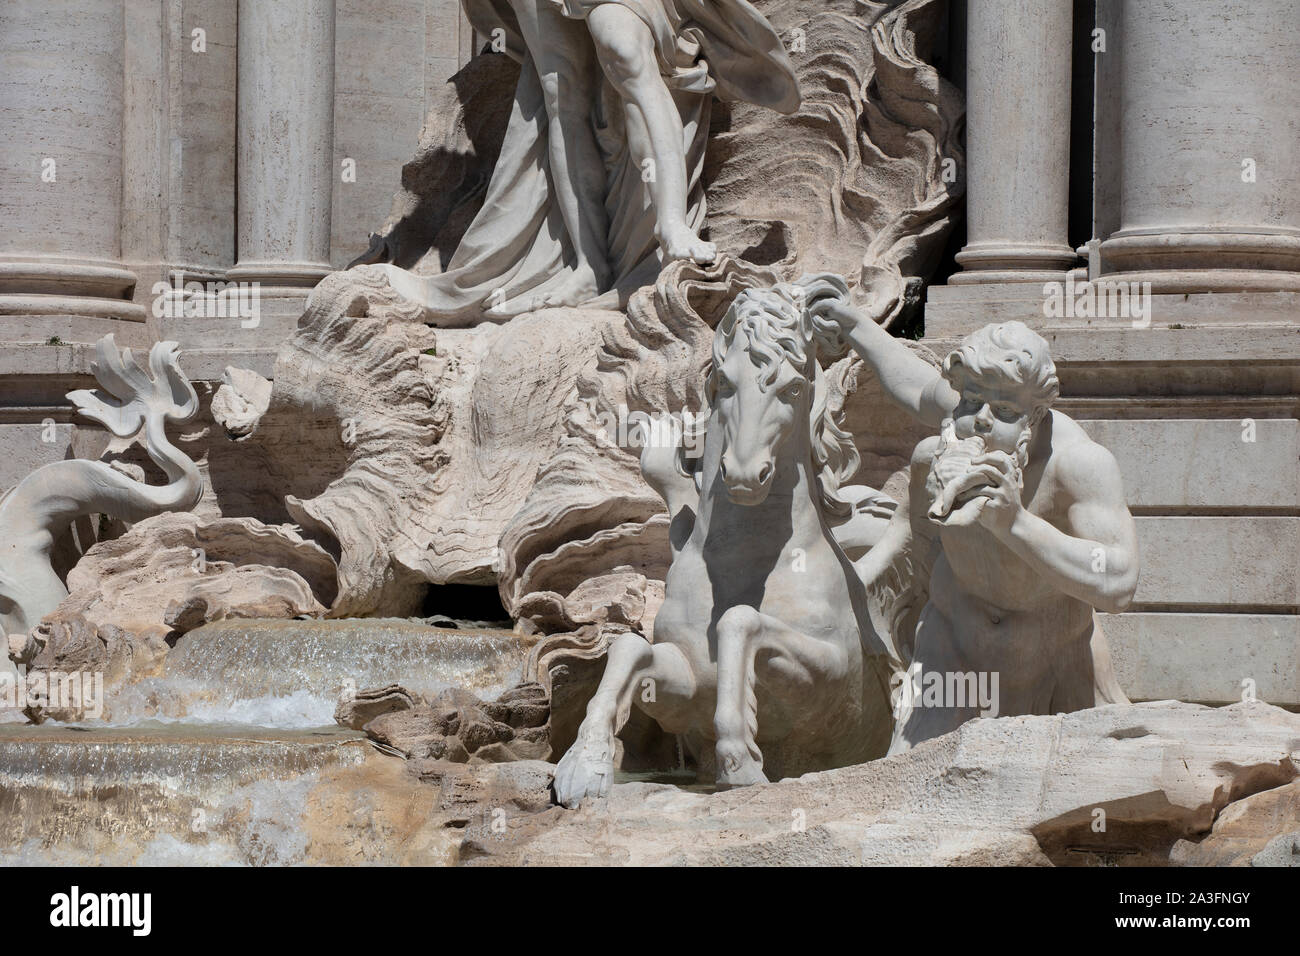 Detail of the statues on the Trevi Fountain in Rome, showing the tritons and sea horses struggling on the rocks. Stock Photo